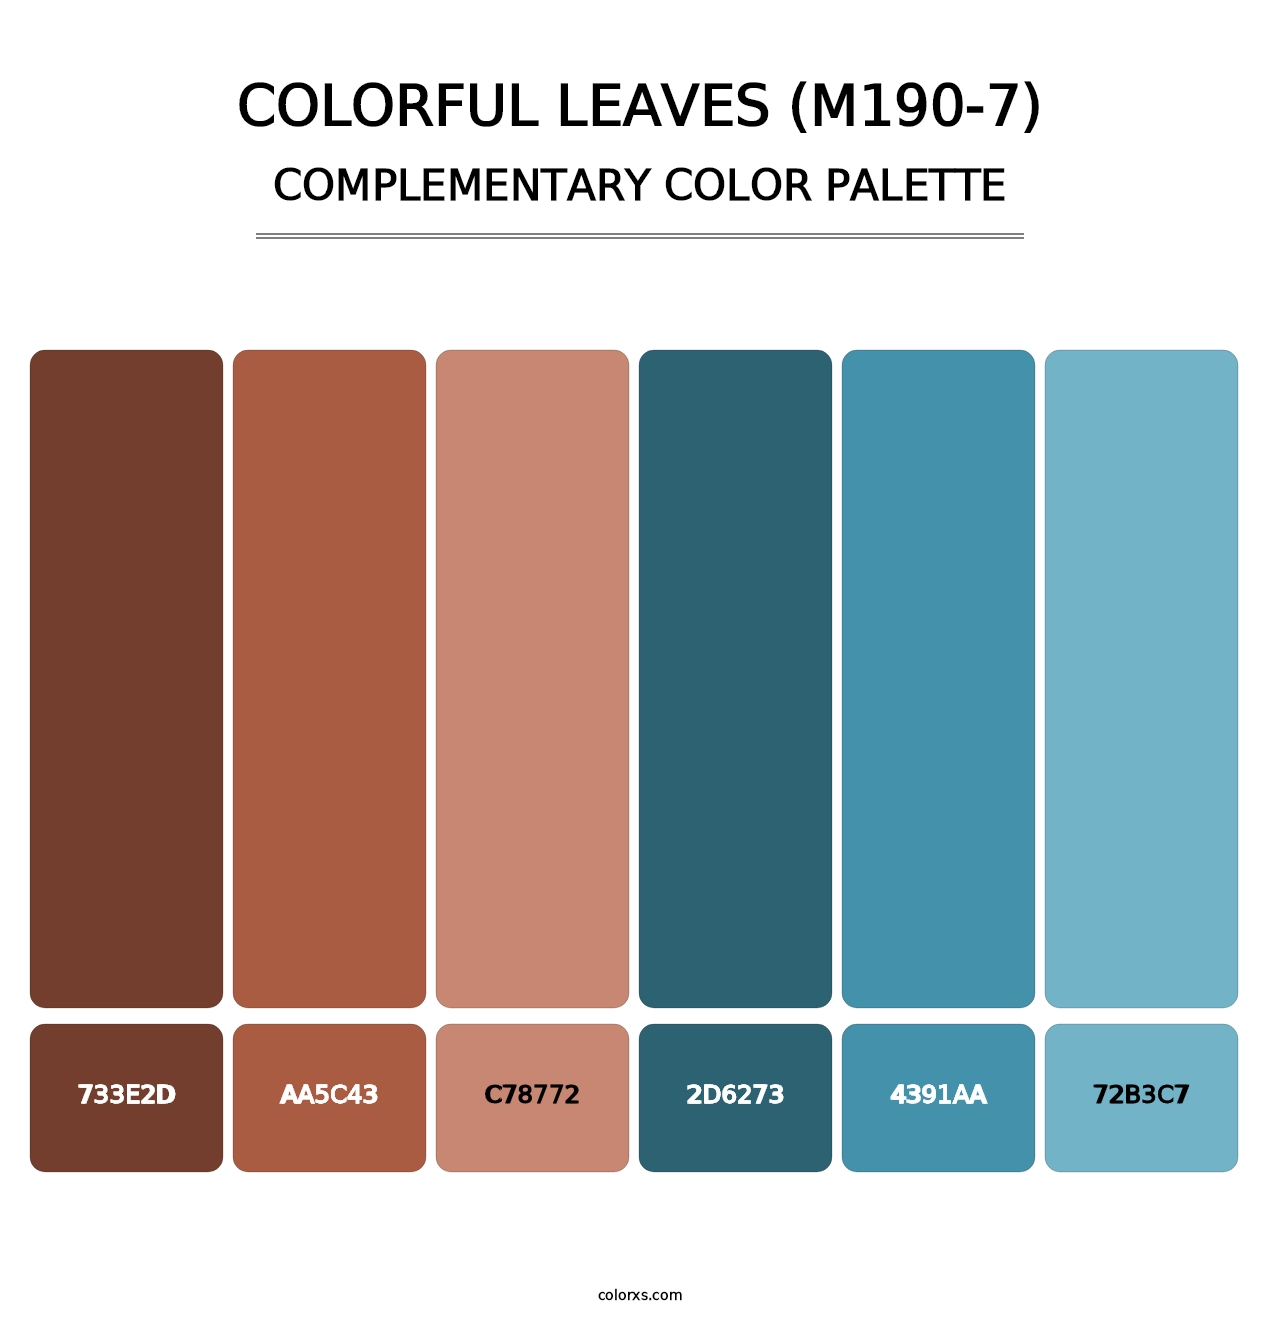 Colorful Leaves (M190-7) - Complementary Color Palette